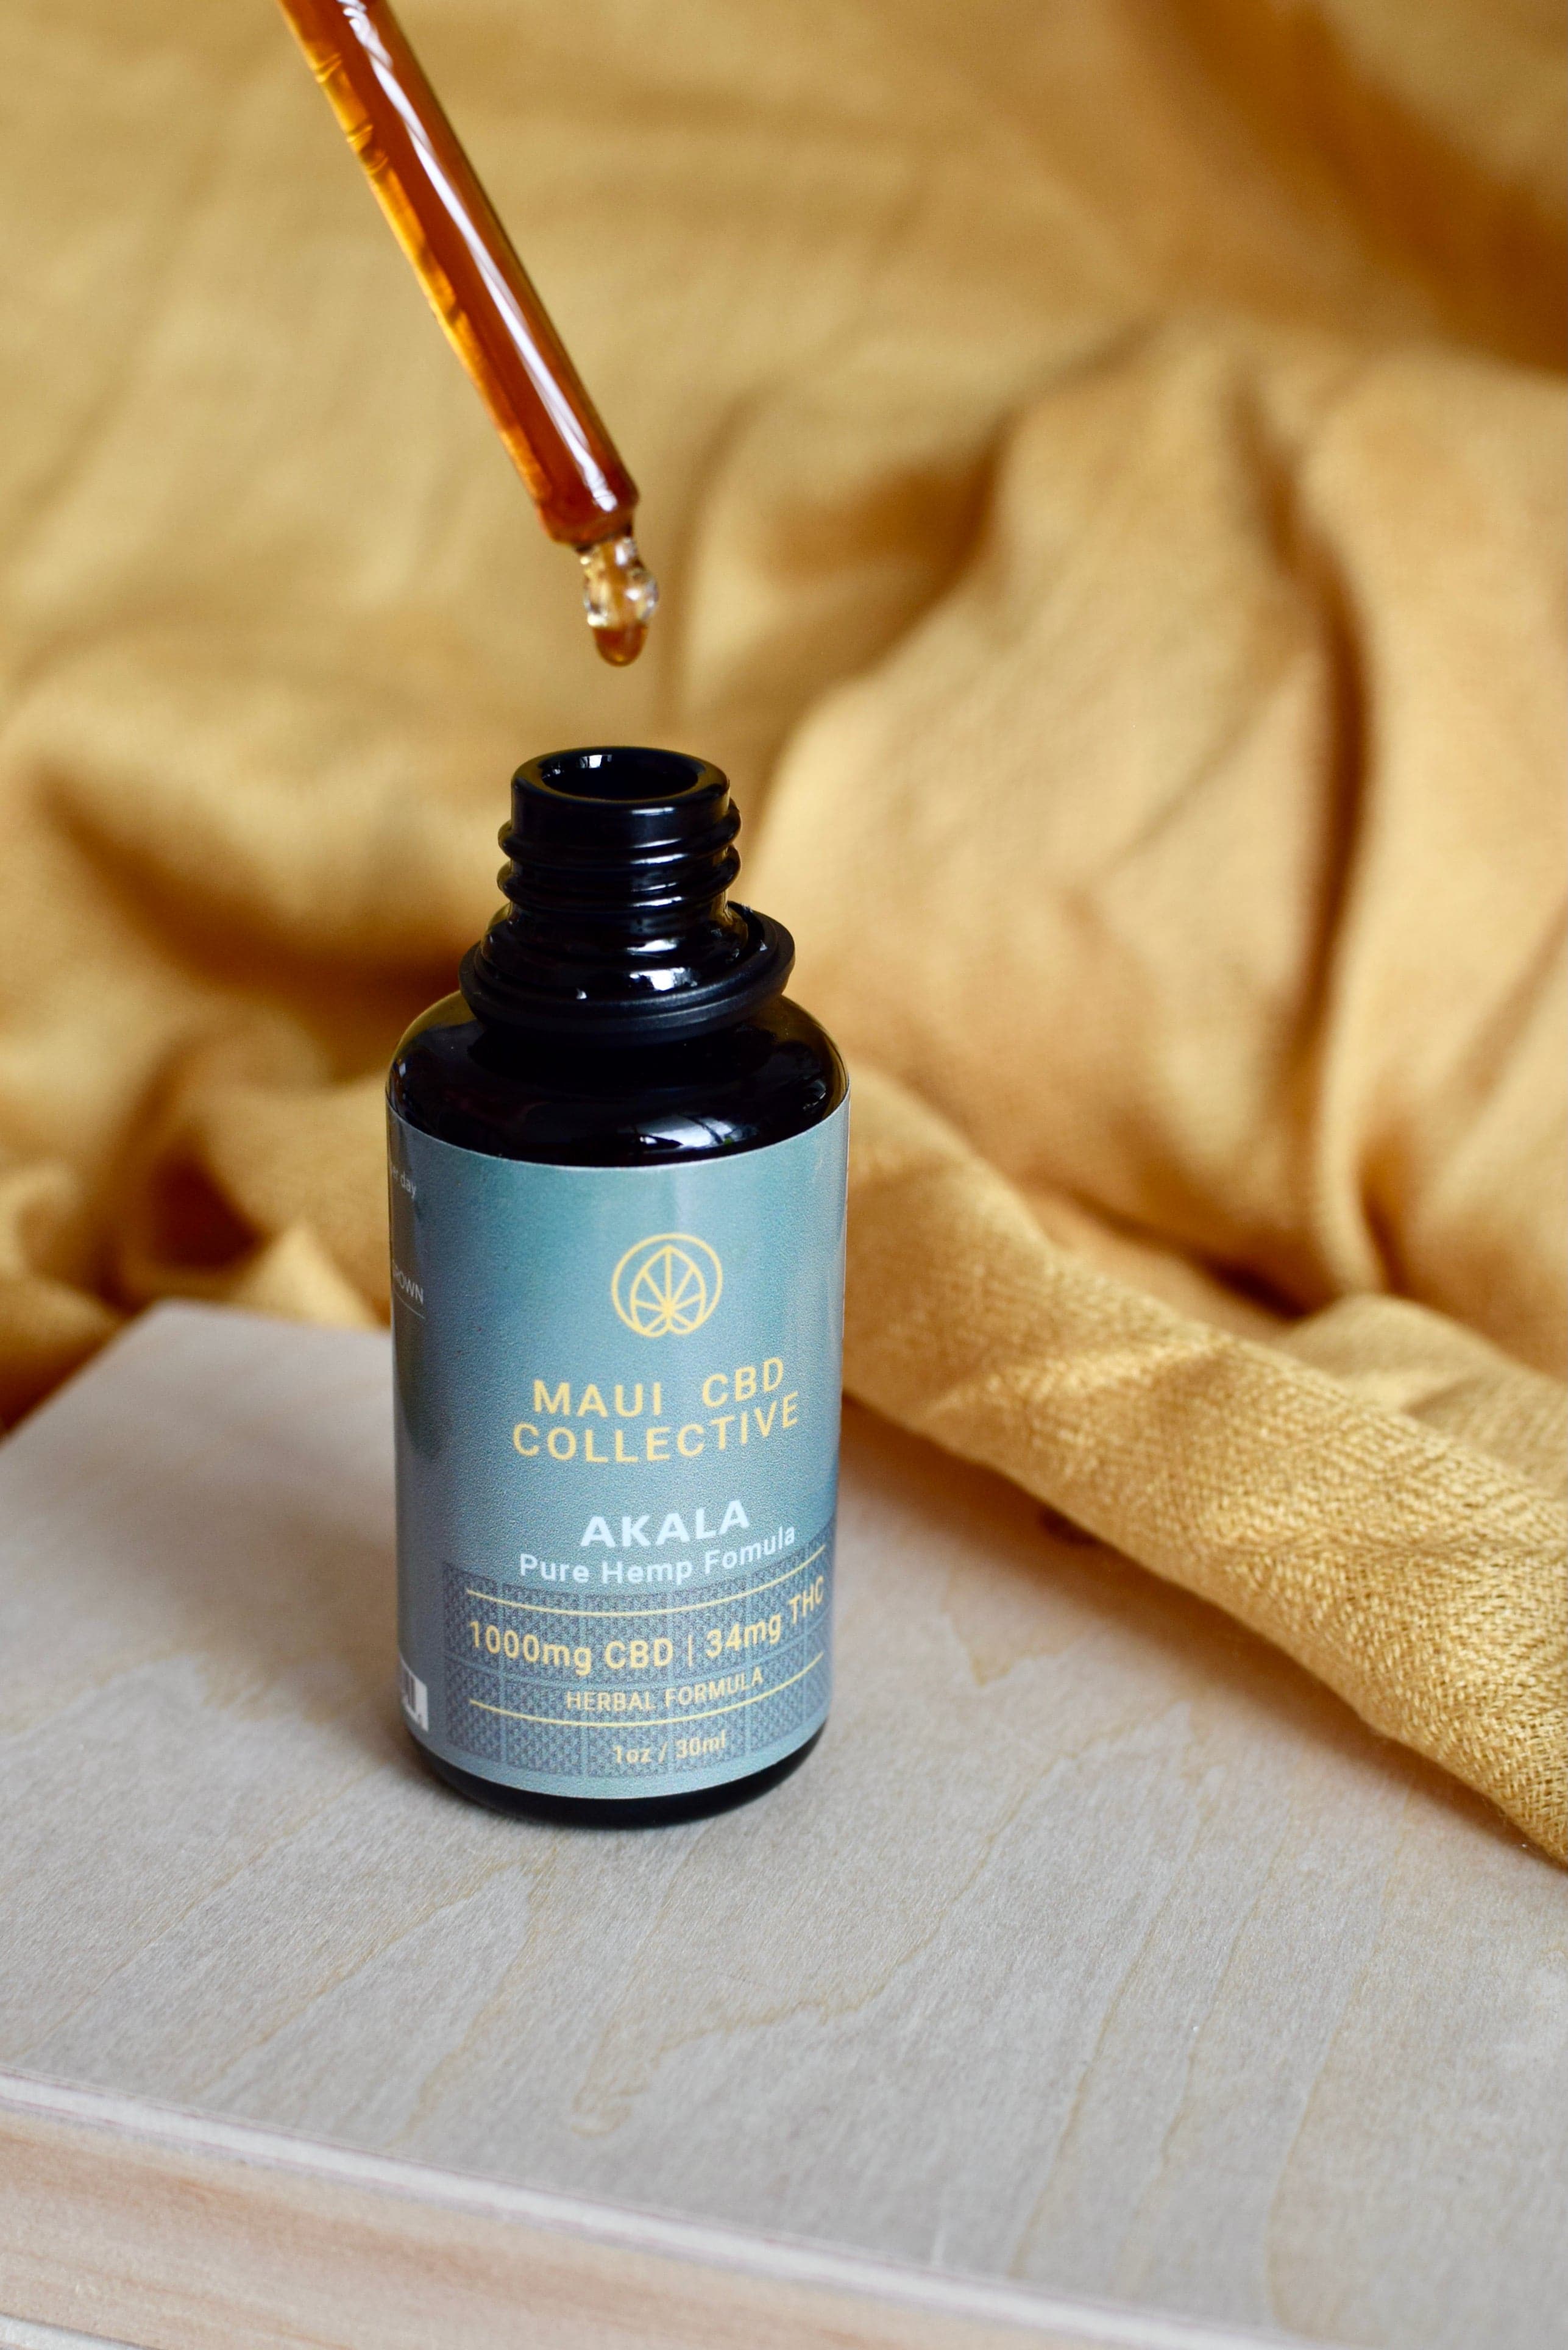 Maui Super Herbs Akala Tincture (Limited Edition Partner Offer - A Benefit for Lahaina)